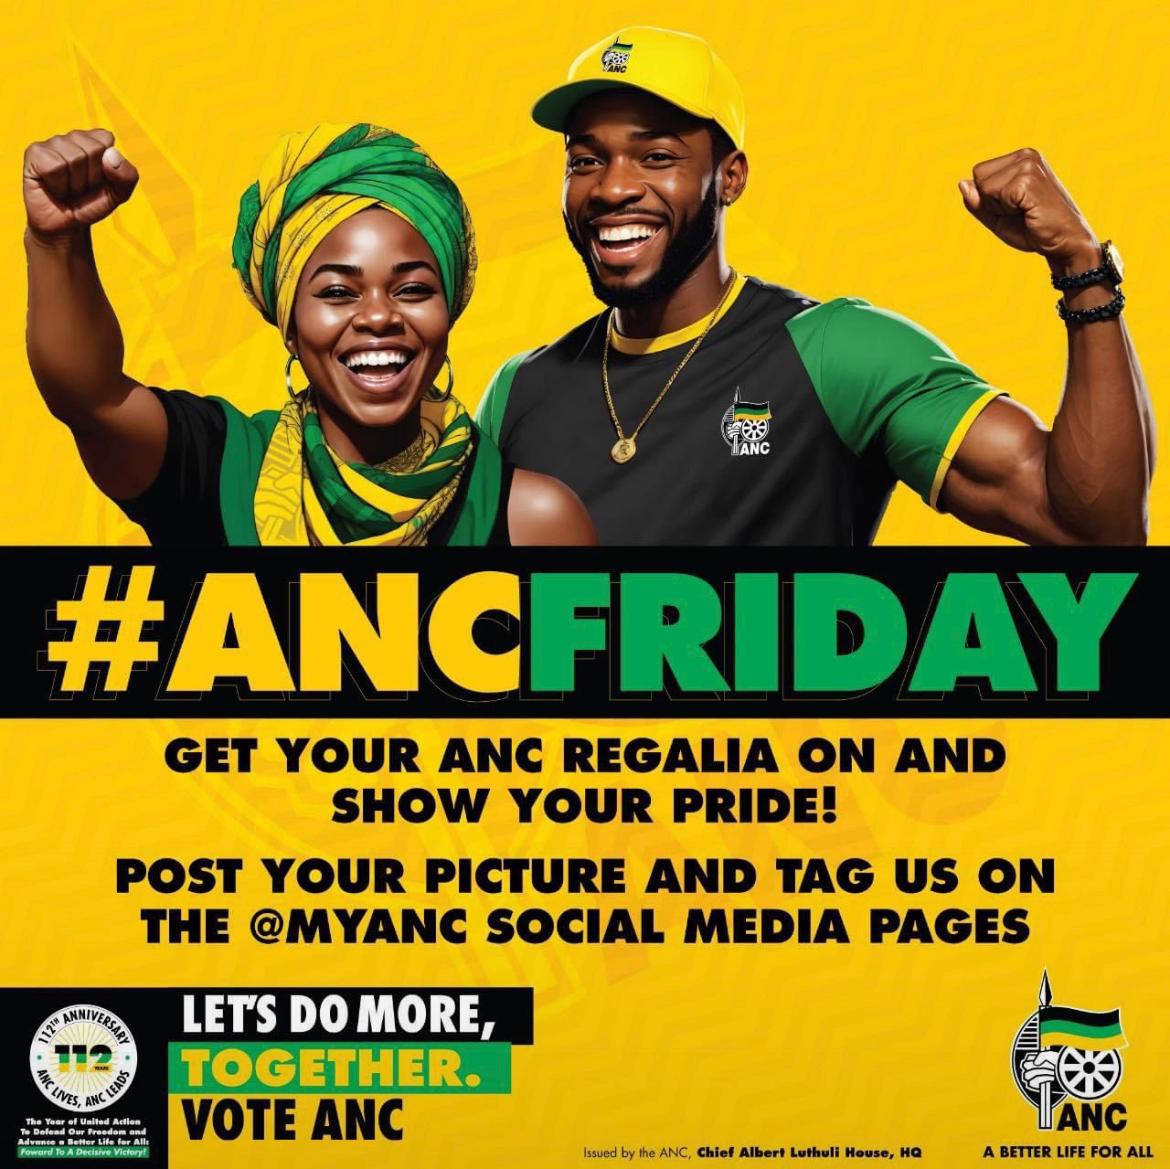 Don't forget to wear your ANC gear today. Get your doek on, t-shirts, dresses, and caps! Be proud of this glorious movement. ⚫️🟢🟡 #ANCComeDuzeFriday #VoteANC2024 #ANCFriday